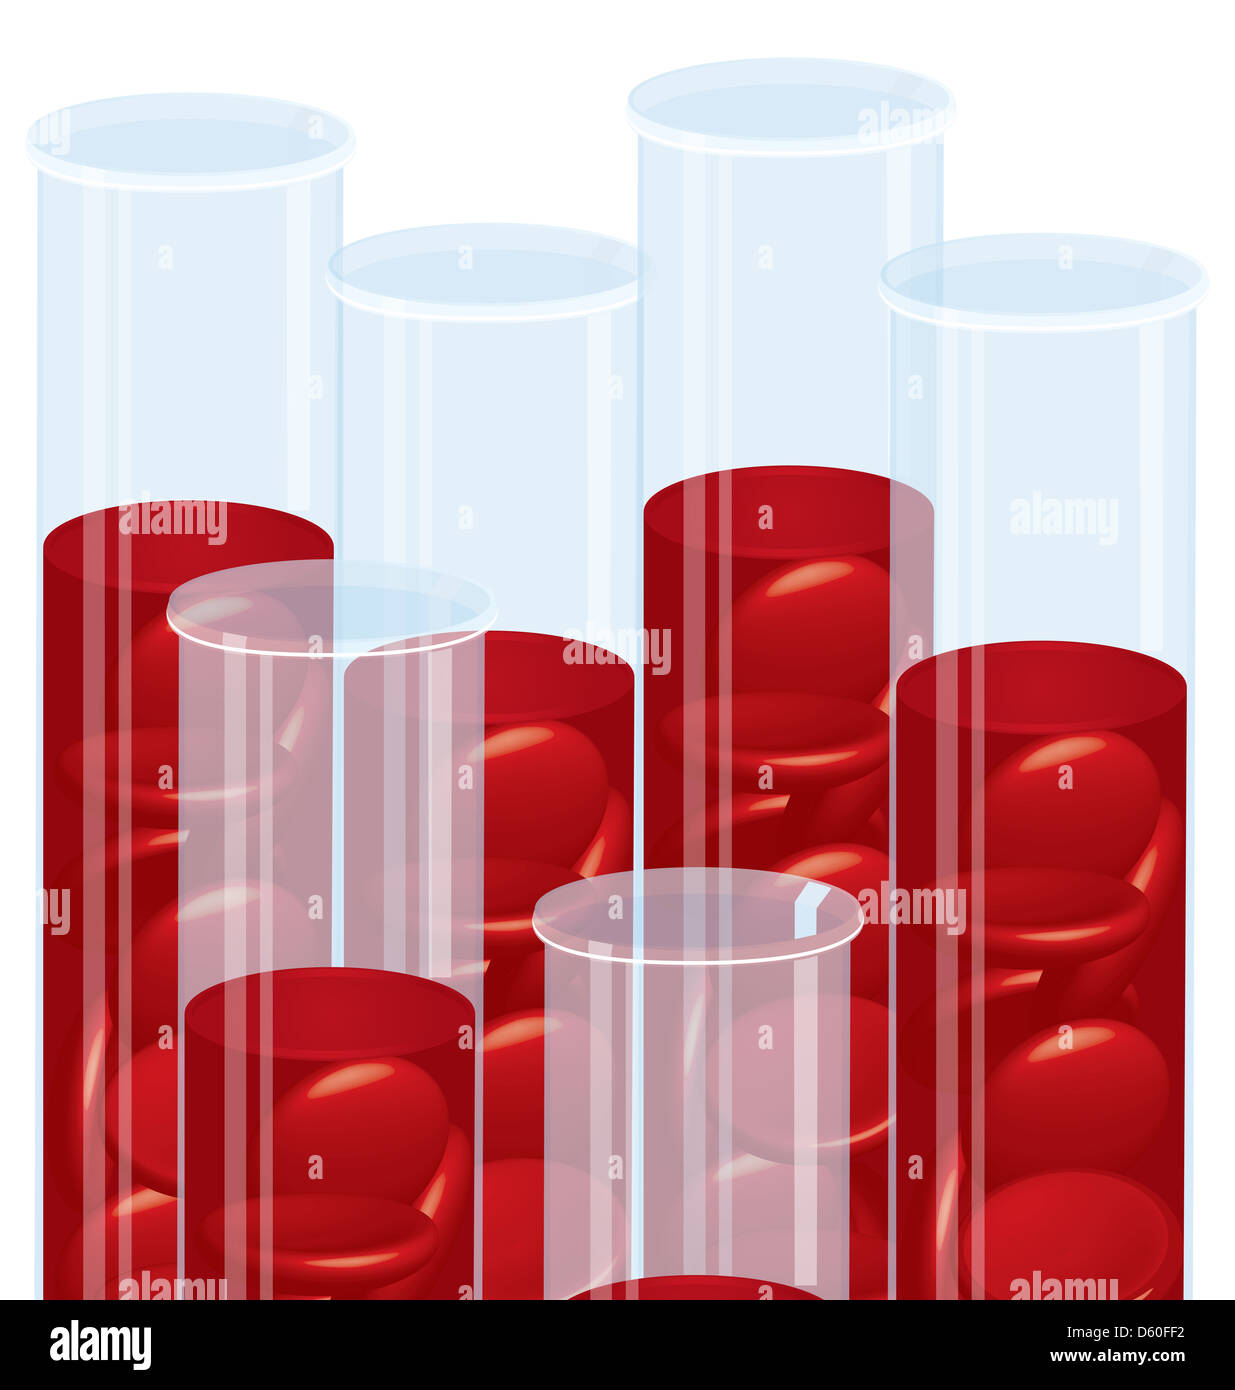 Blood cell many test tubes Stock Photo